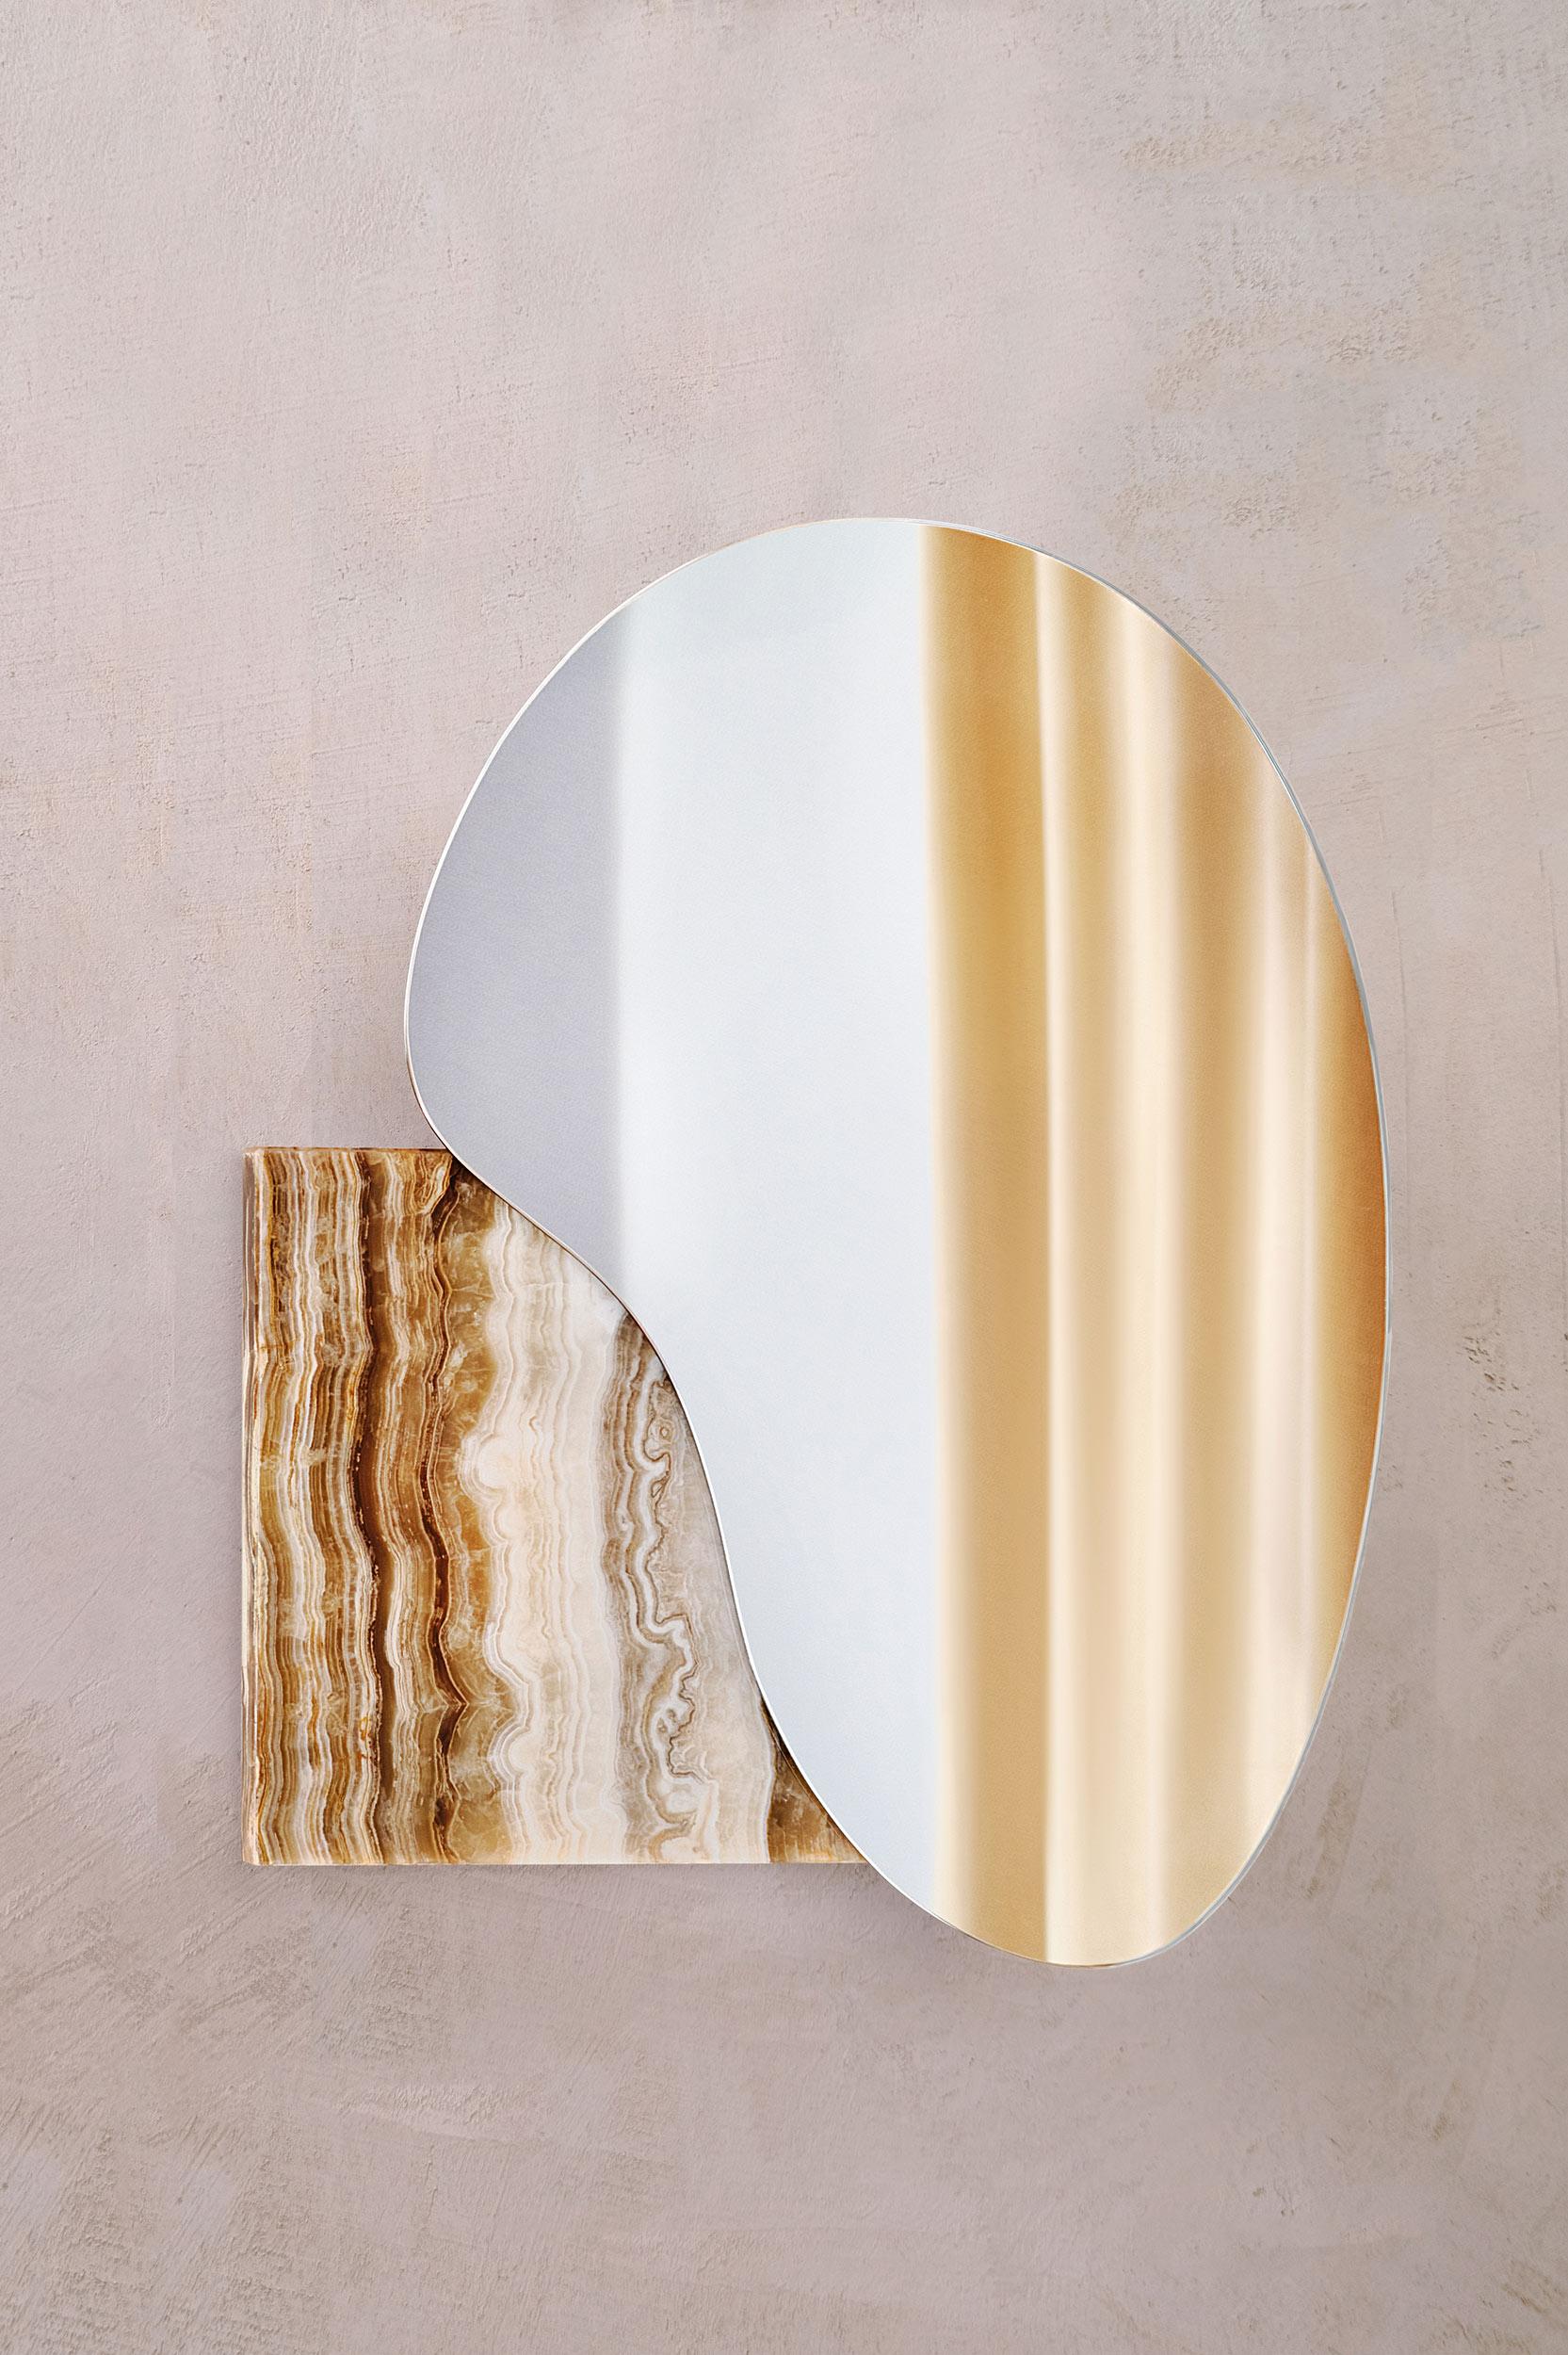 Oak Contemporary Wall Mirror 'Lake 1' by Noom, Blue veneered wood  For Sale